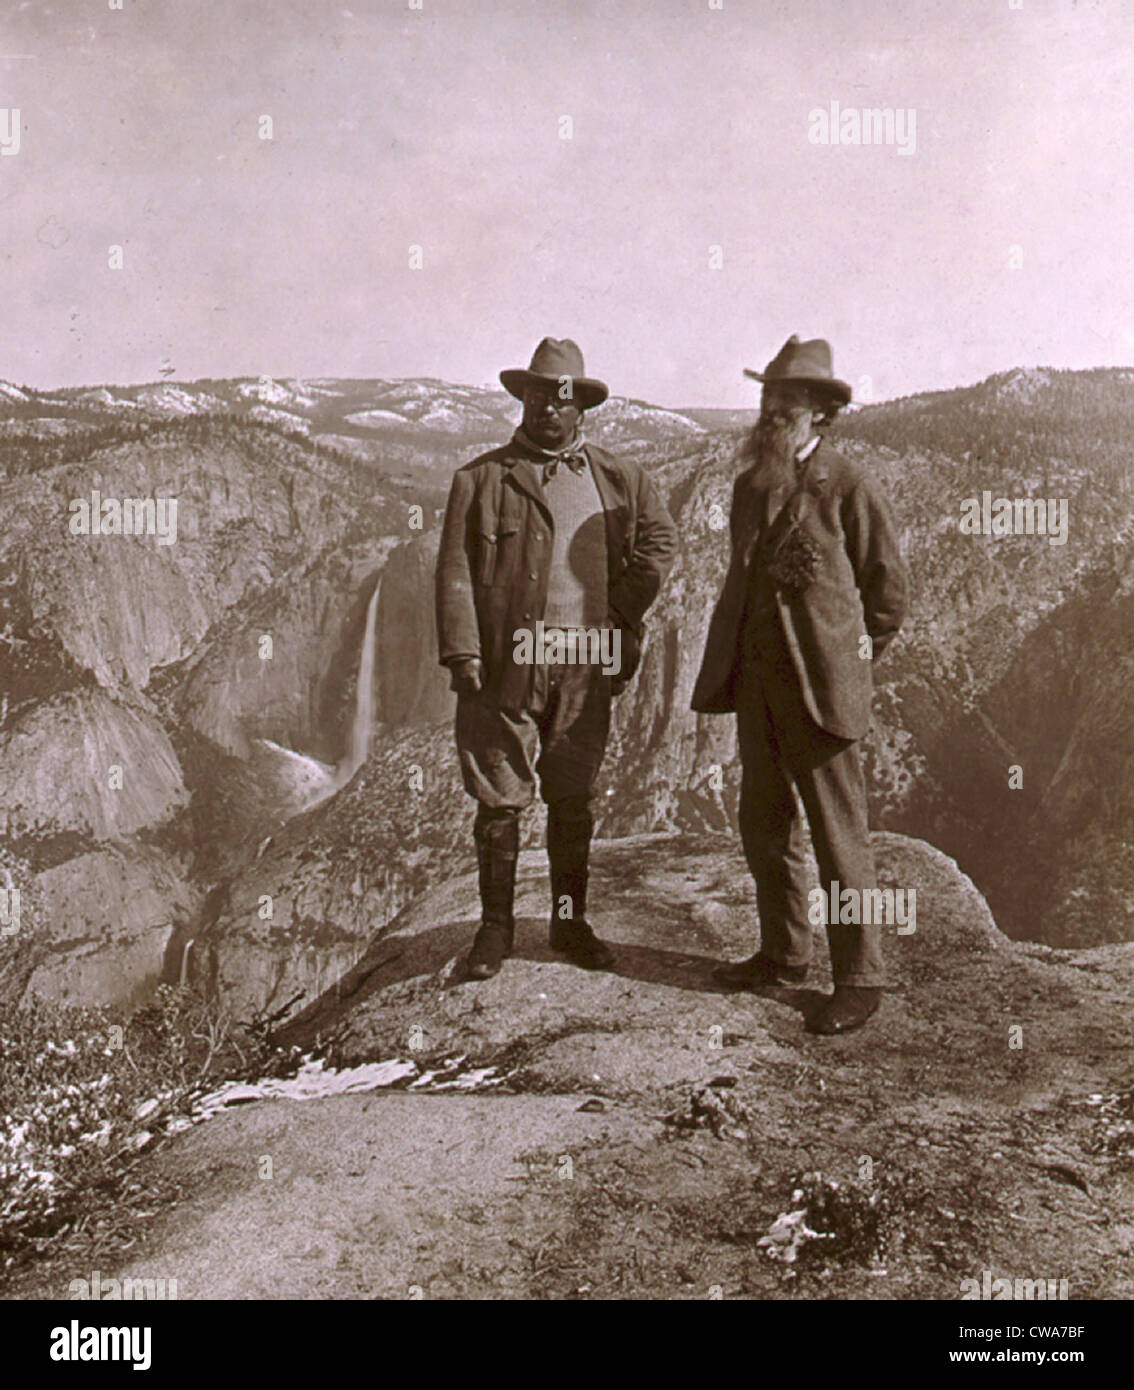 John Muir advocated conservation programs adopted by President Theodore Roosevelt, who in 1903 accompanied Muir on a camping Stock Photo